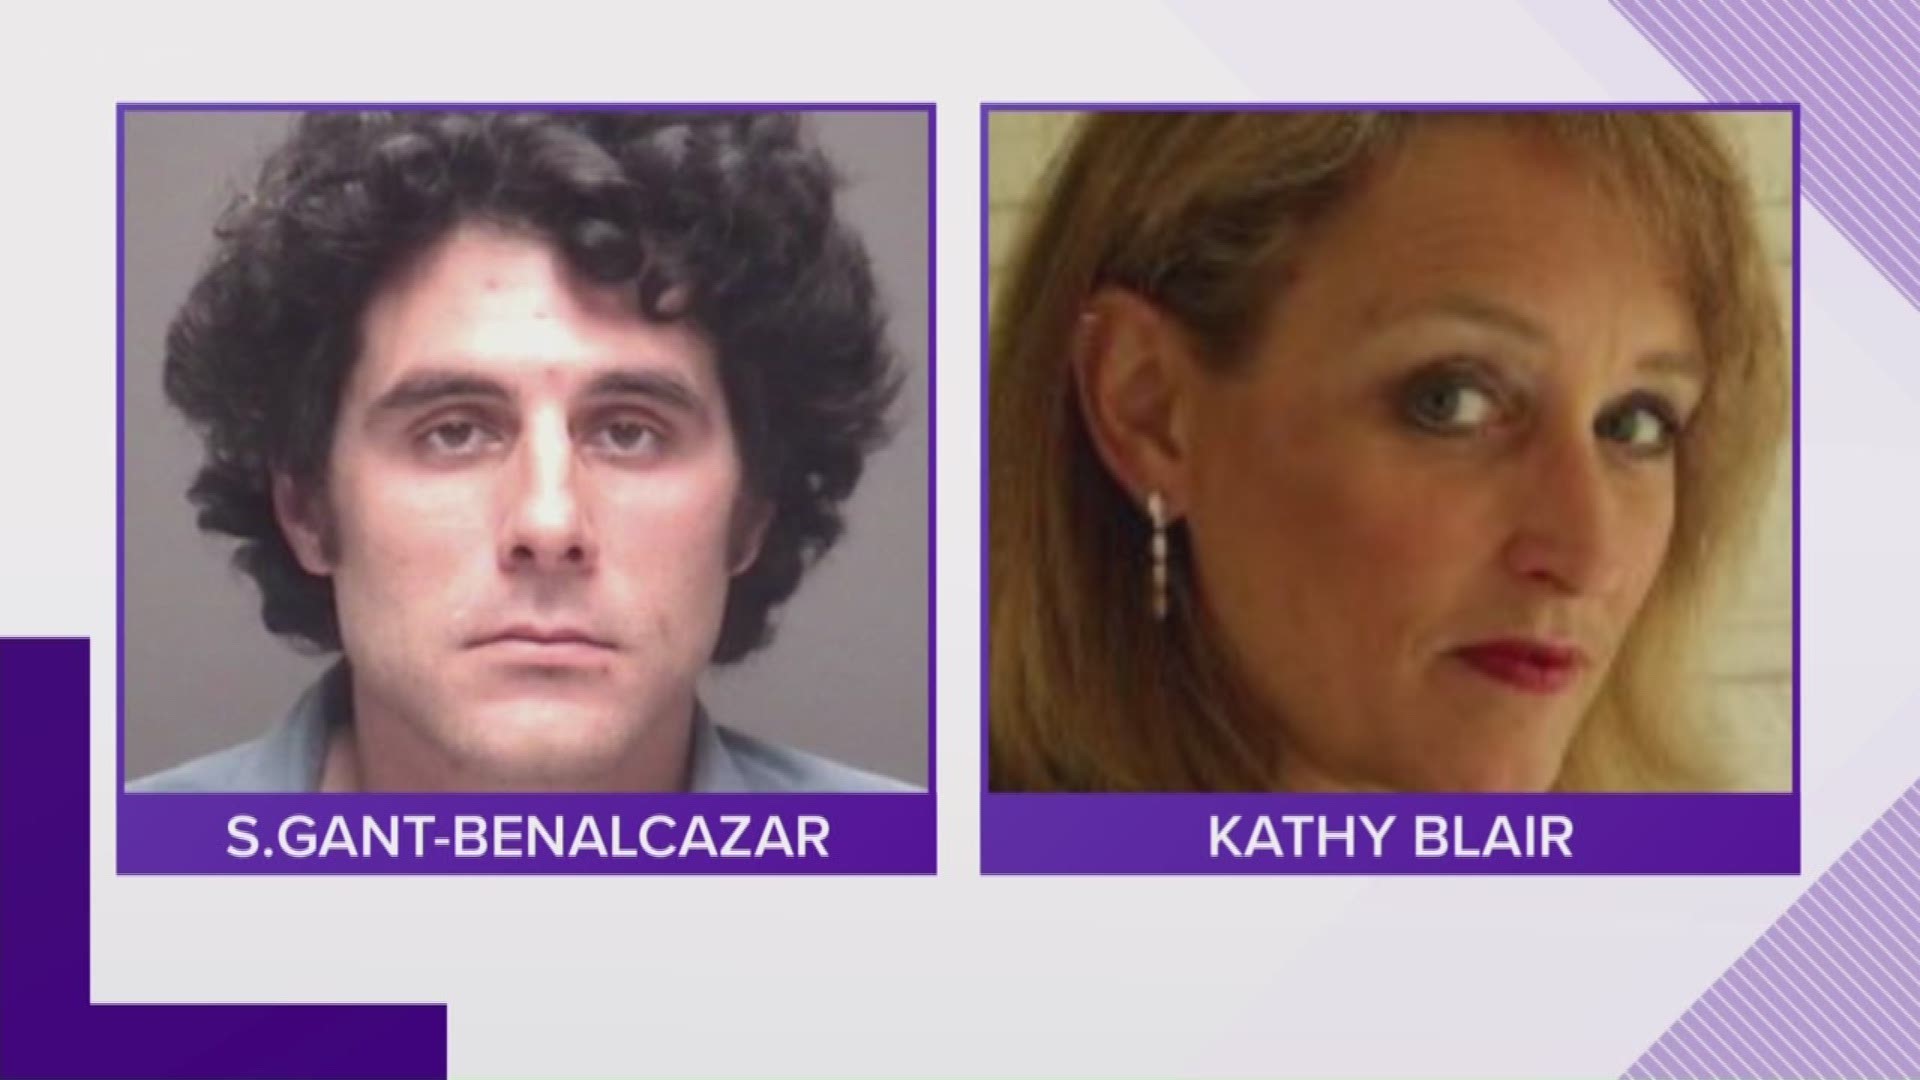 Shawn Gant-Benalcazar is charged with capital murder for the 2014 stabbing death of Kathy Blair.